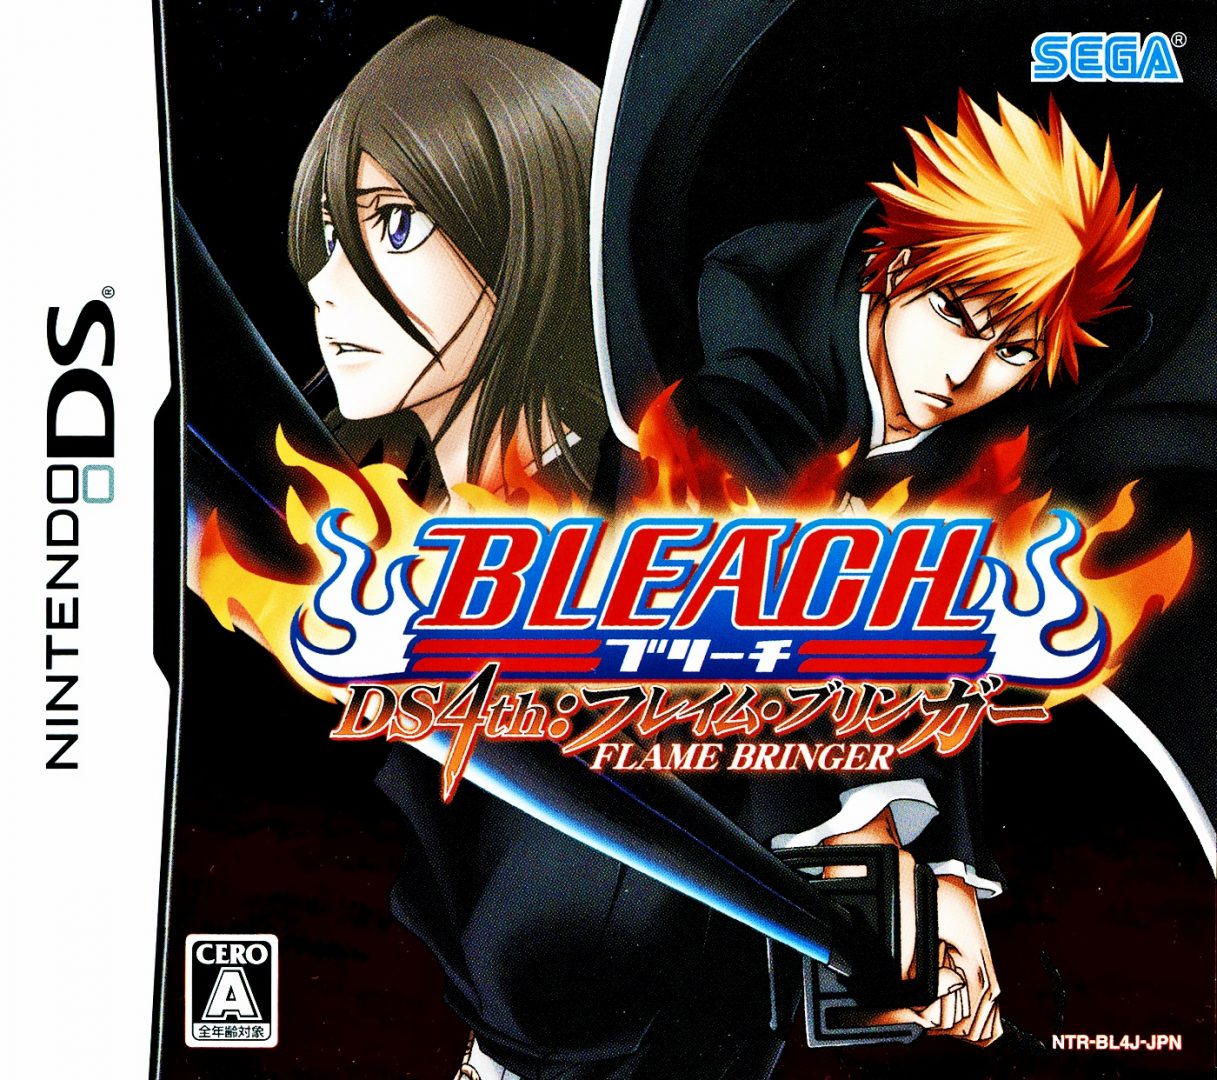 The coverart image of Bleach DS 4th: Flame Bringer 